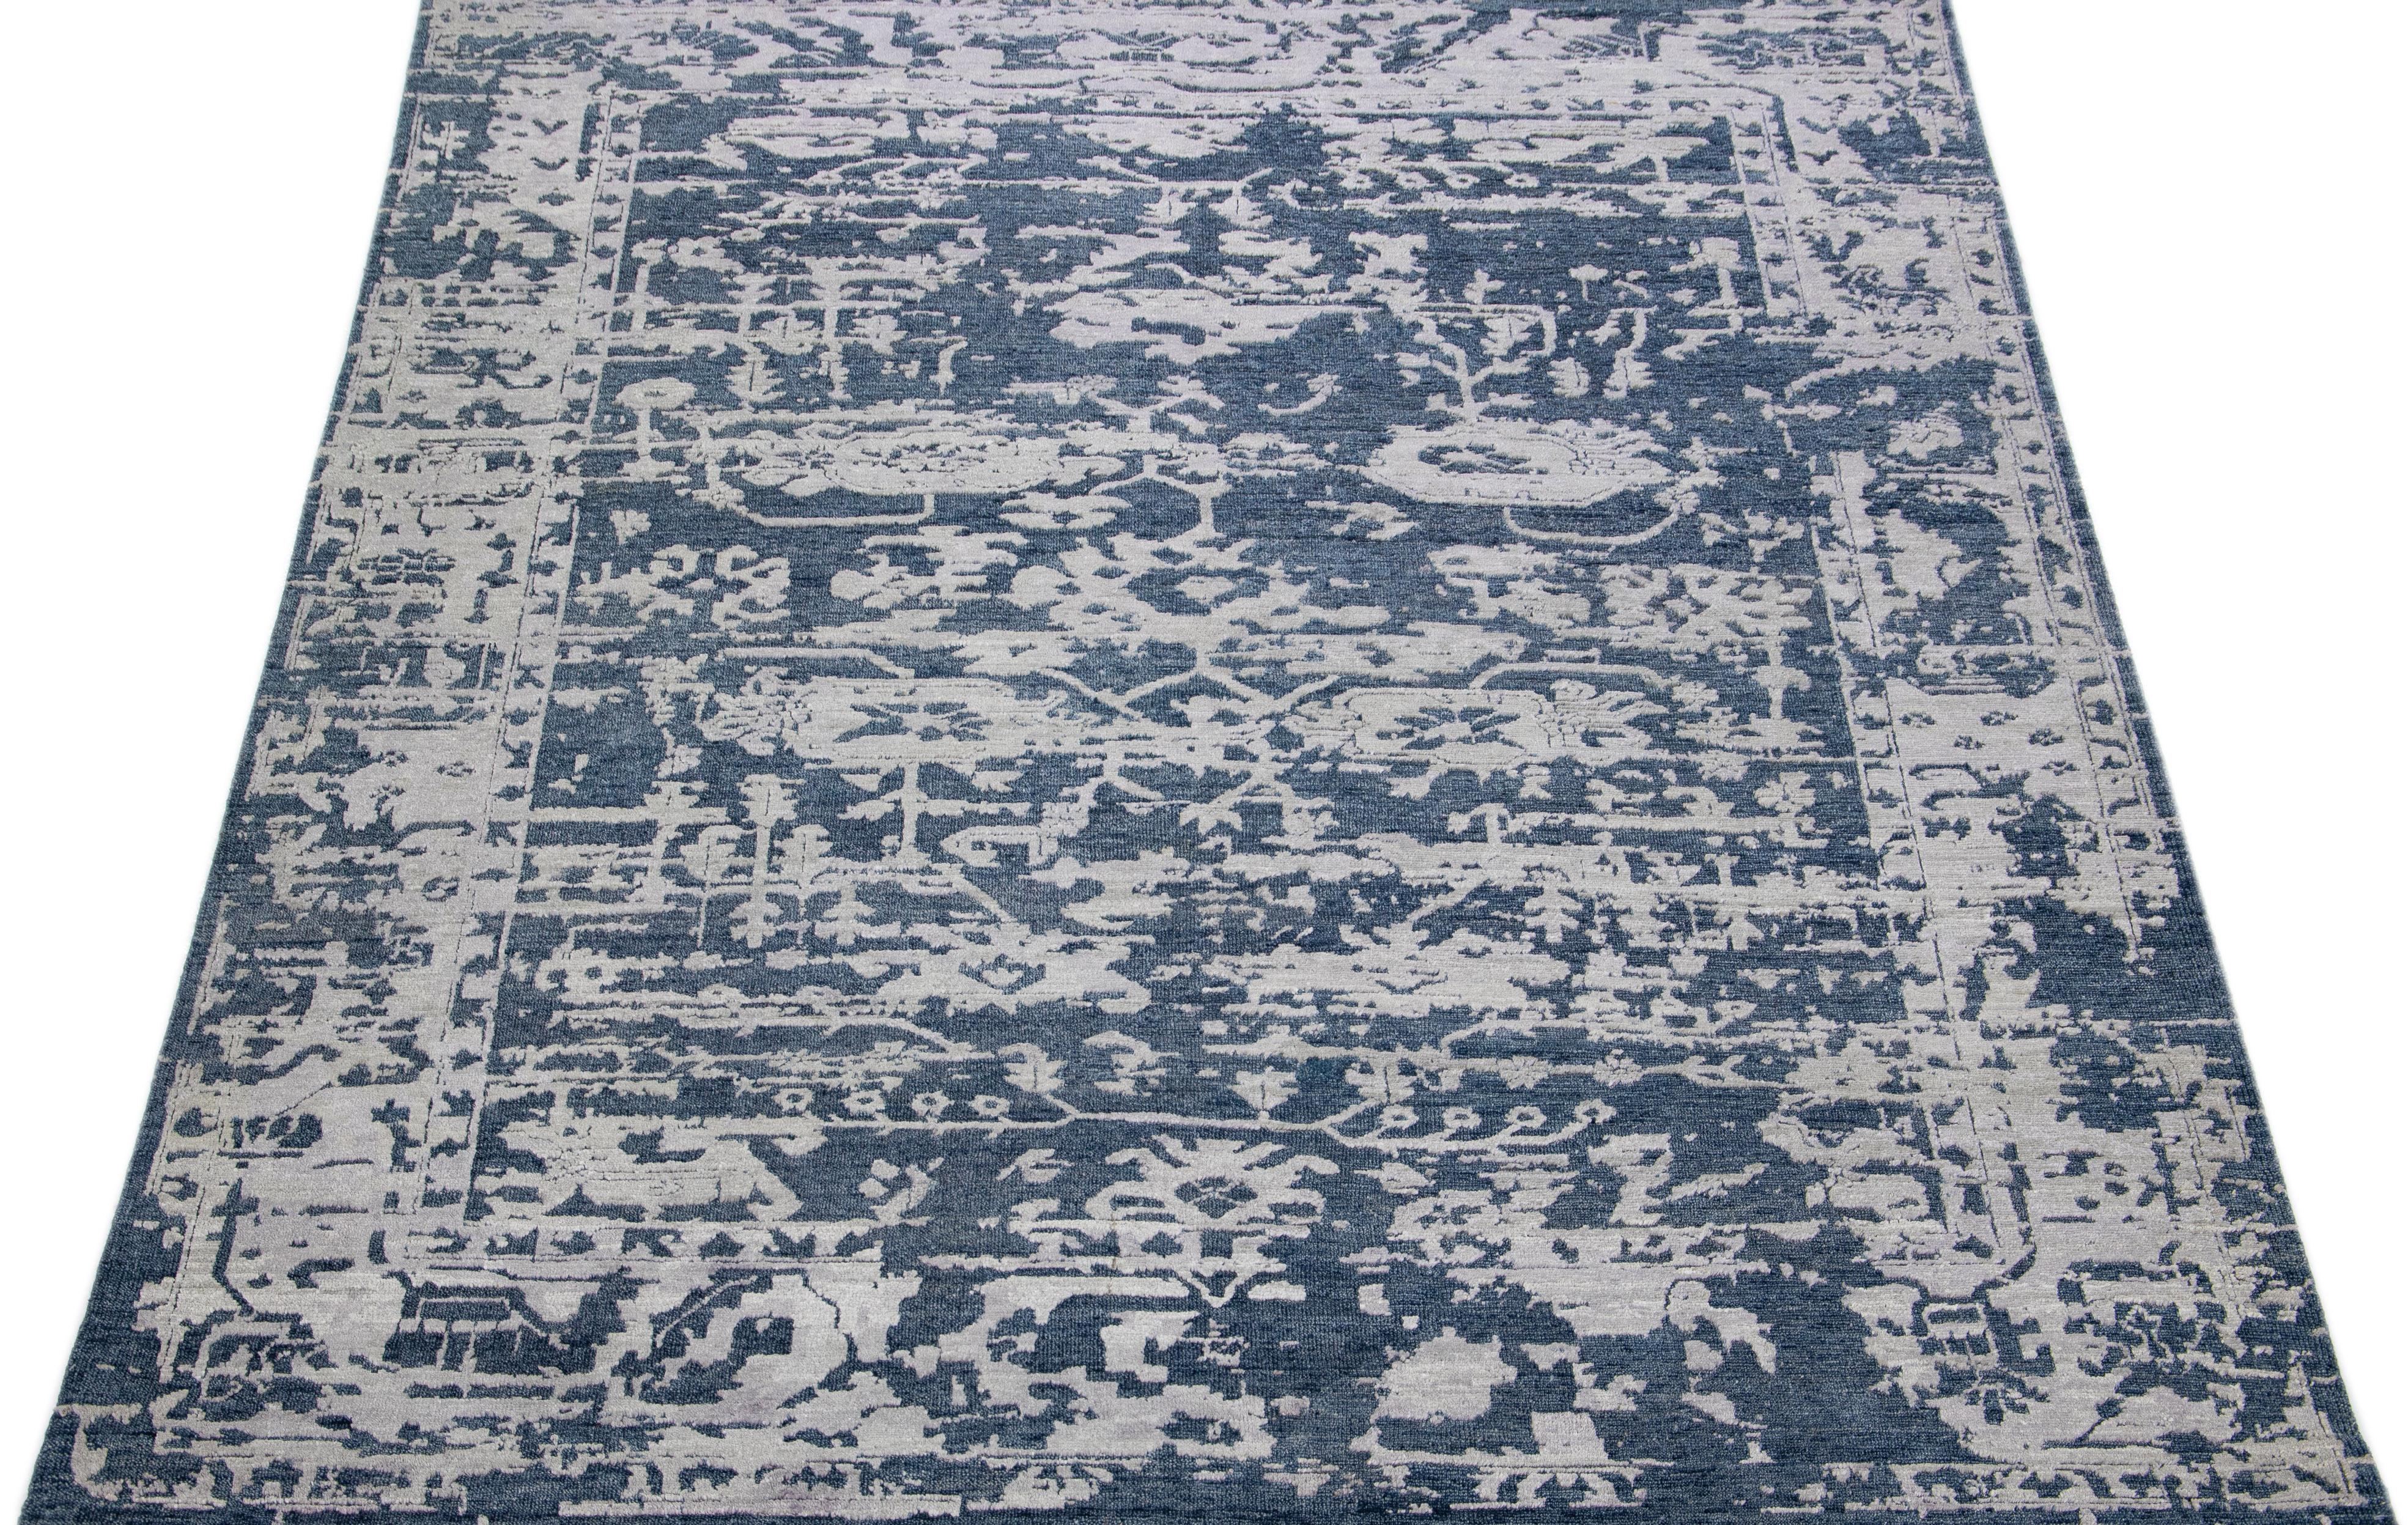 This stunning, modern Indian wool and silk combination rug is both elegant and stylish, featuring a navy blue field amidst an abstract patterning of gray. Its combination of luxurious wool and silk fibers offers a comfortable softness, while its low